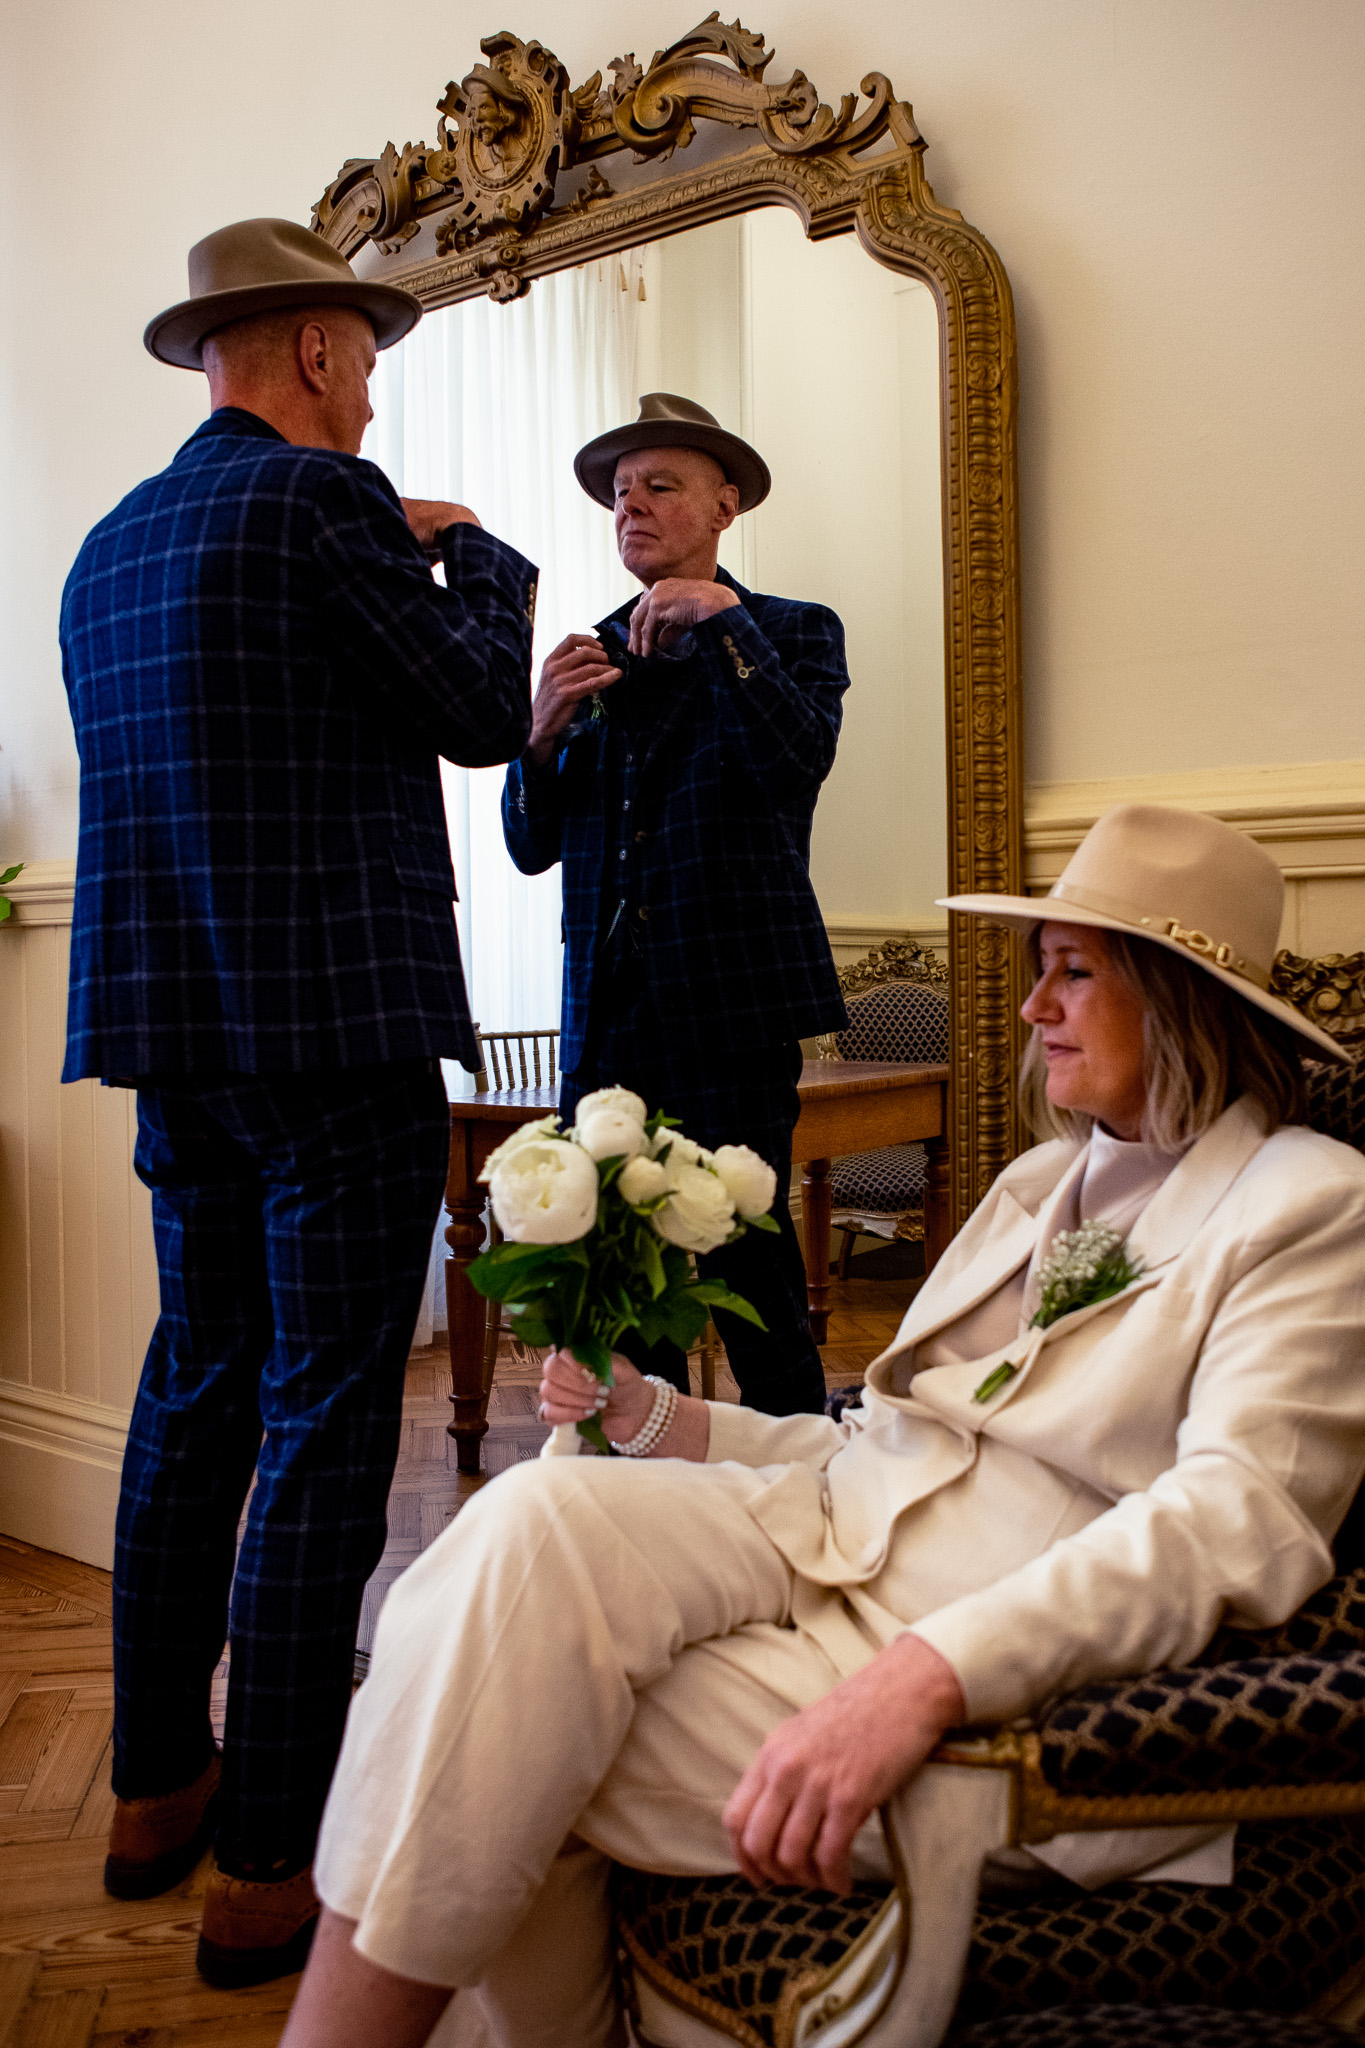 Mike adjusts his wedding outfit in the mirror whilst Mary sits next to him holding her bouquet at Brighton Town Hall.